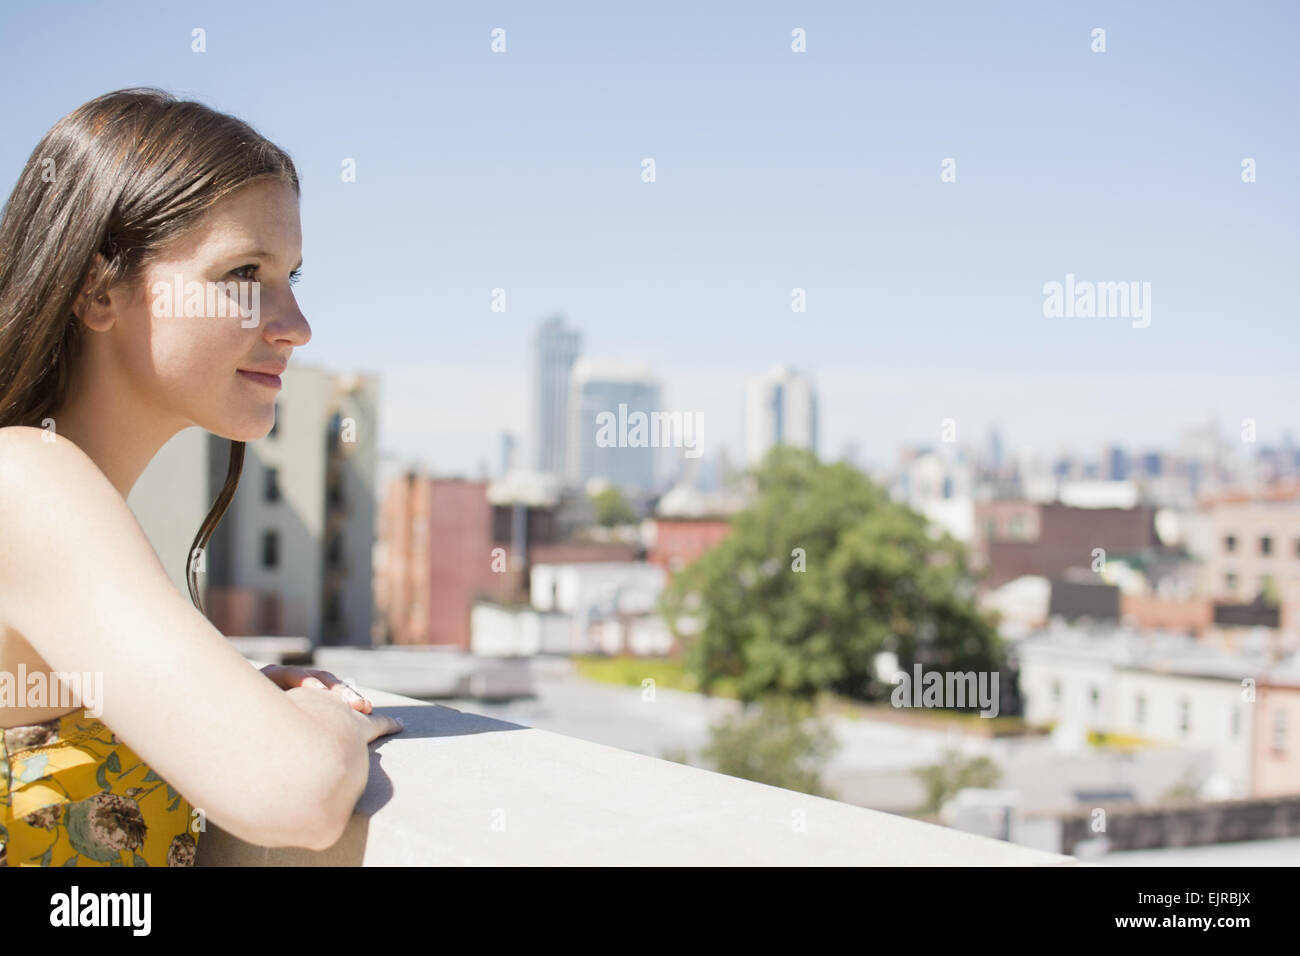 Caucasian woman overlooking cityscape from urban rooftop Stock Photo